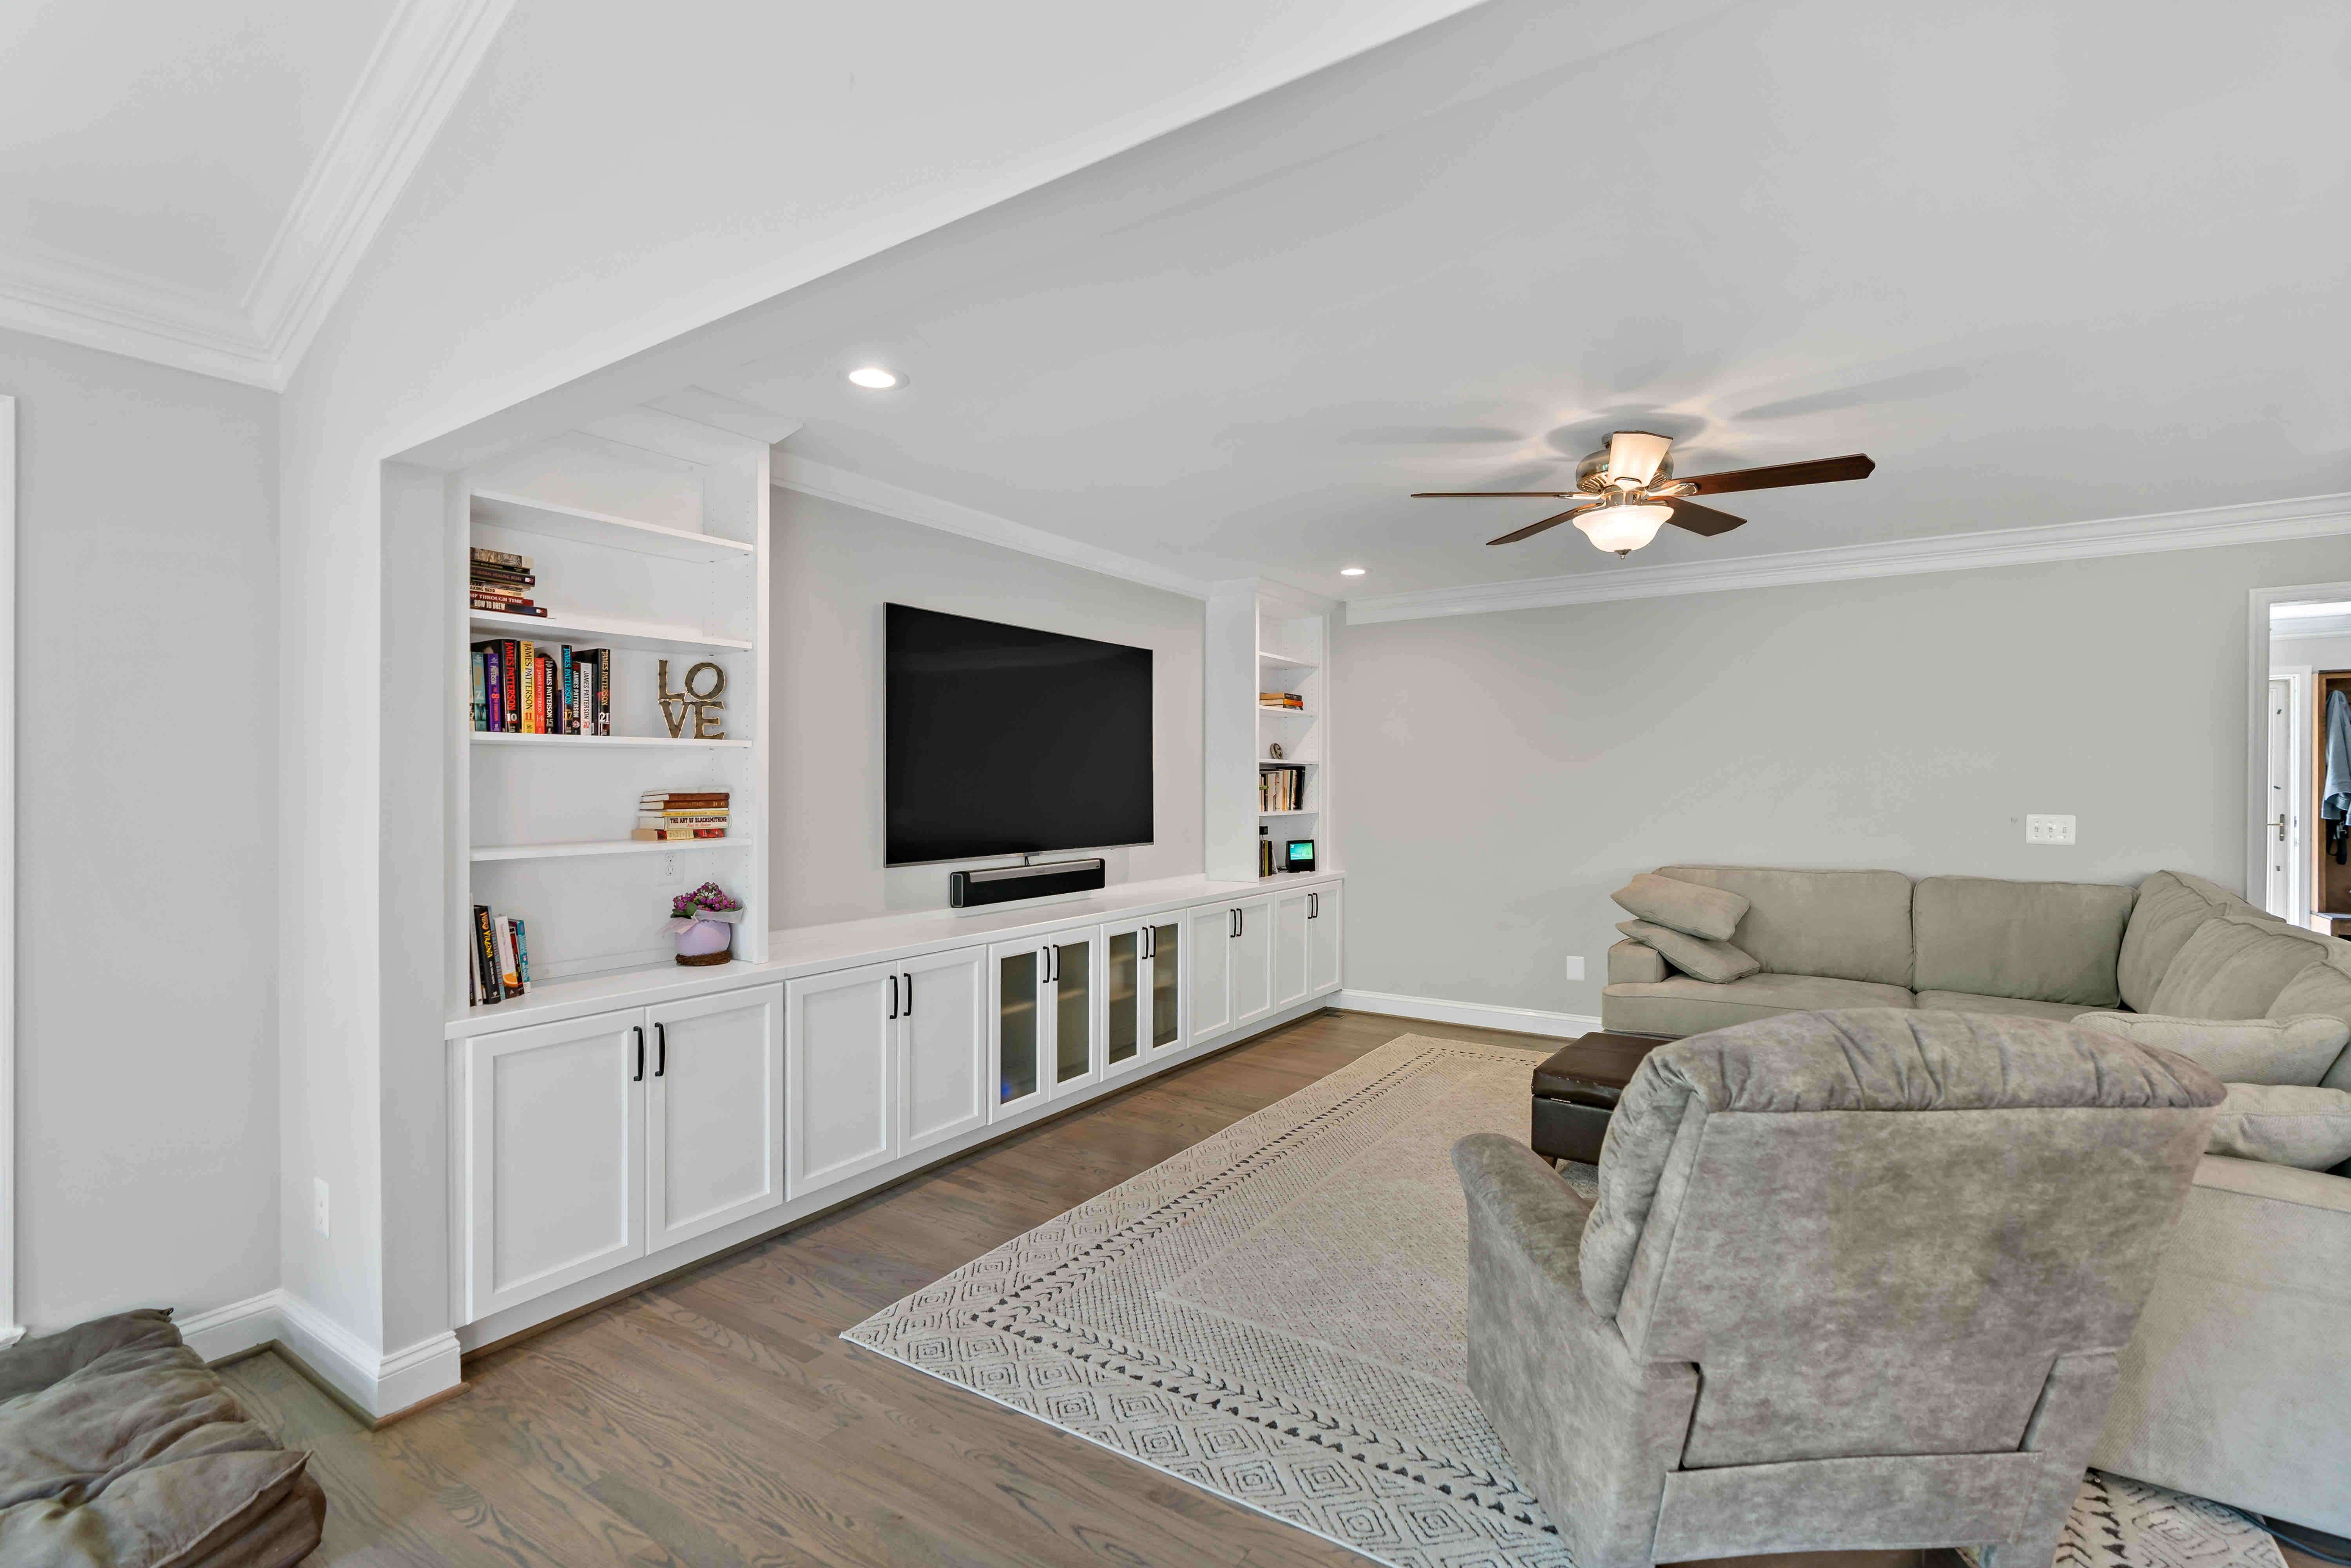 Living room with white walls and ceiling fan